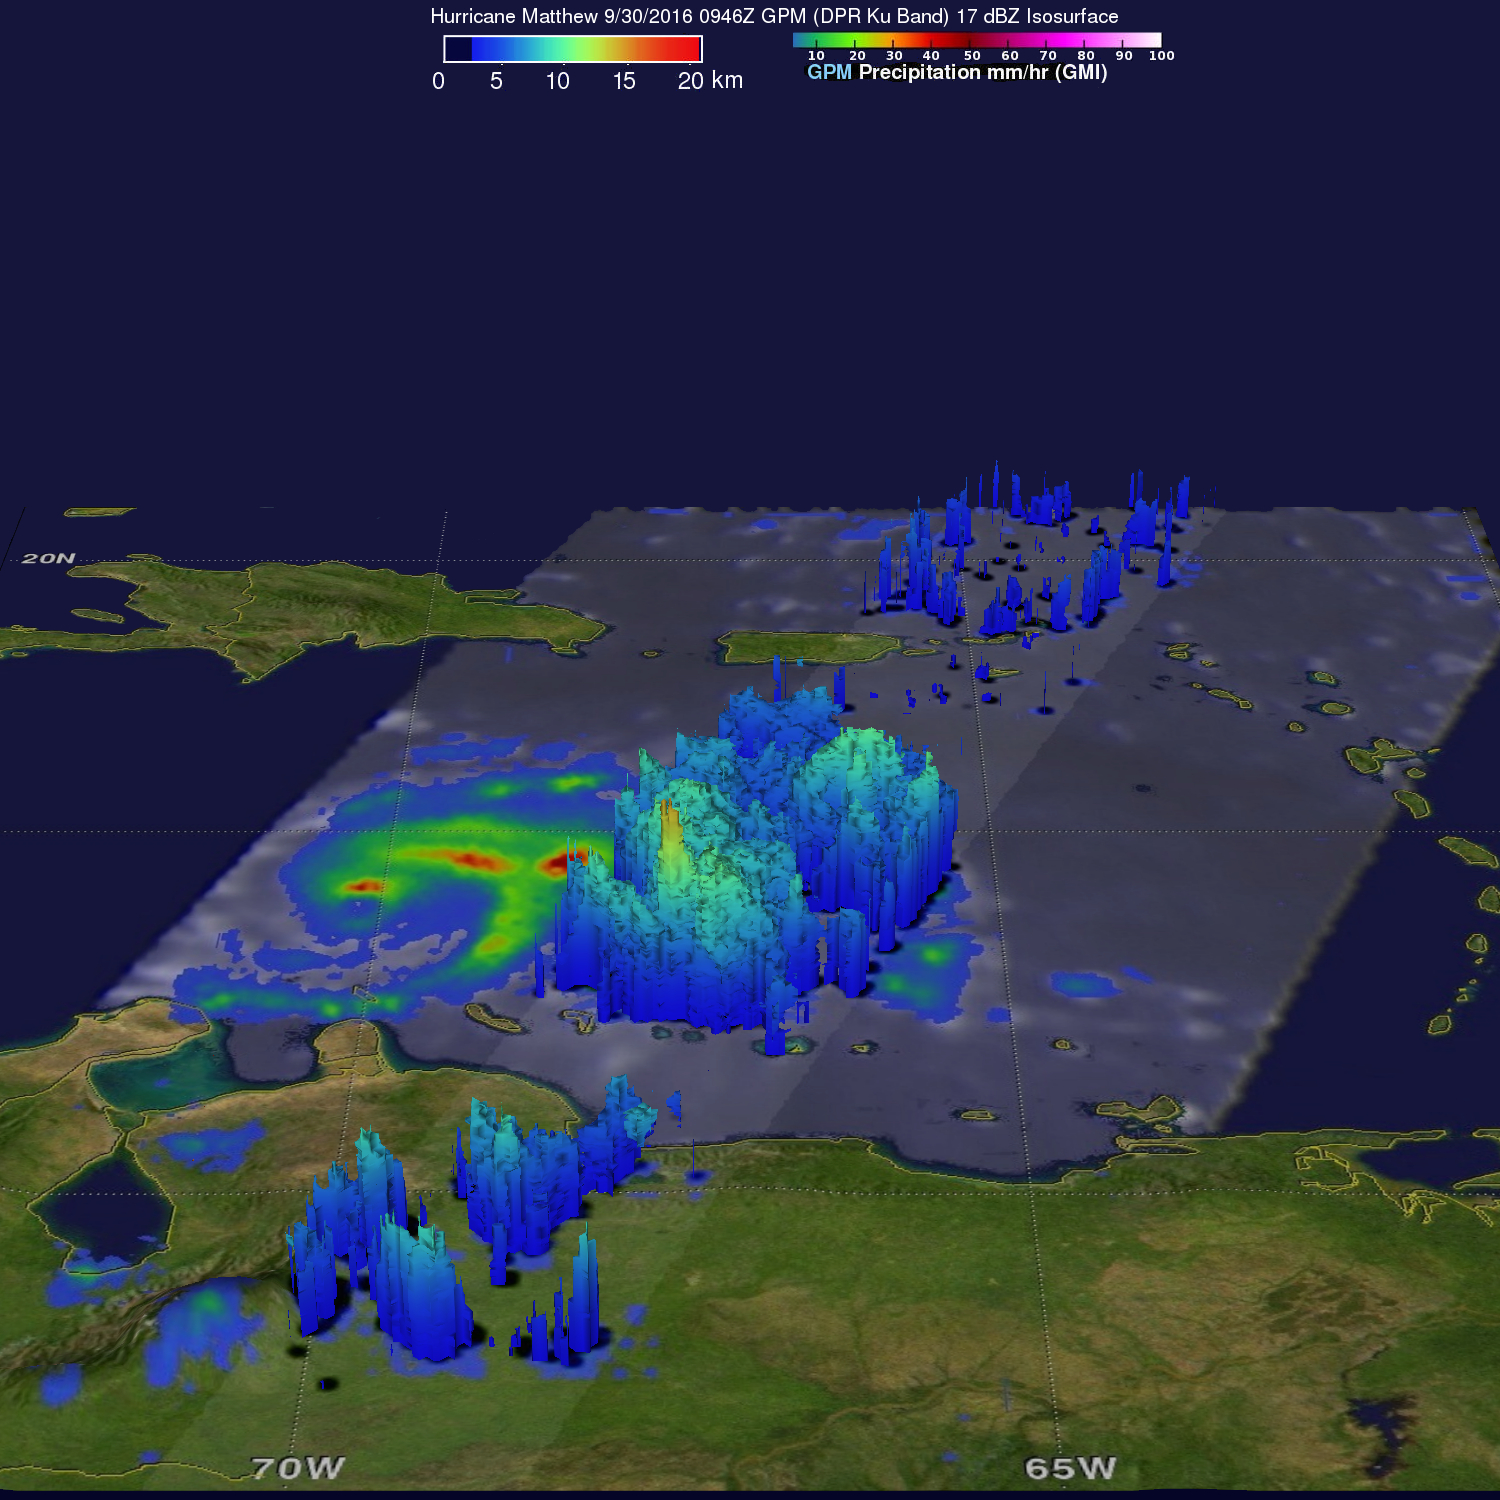 GPM image of Matthew in 3D, with some low towers sticking up.